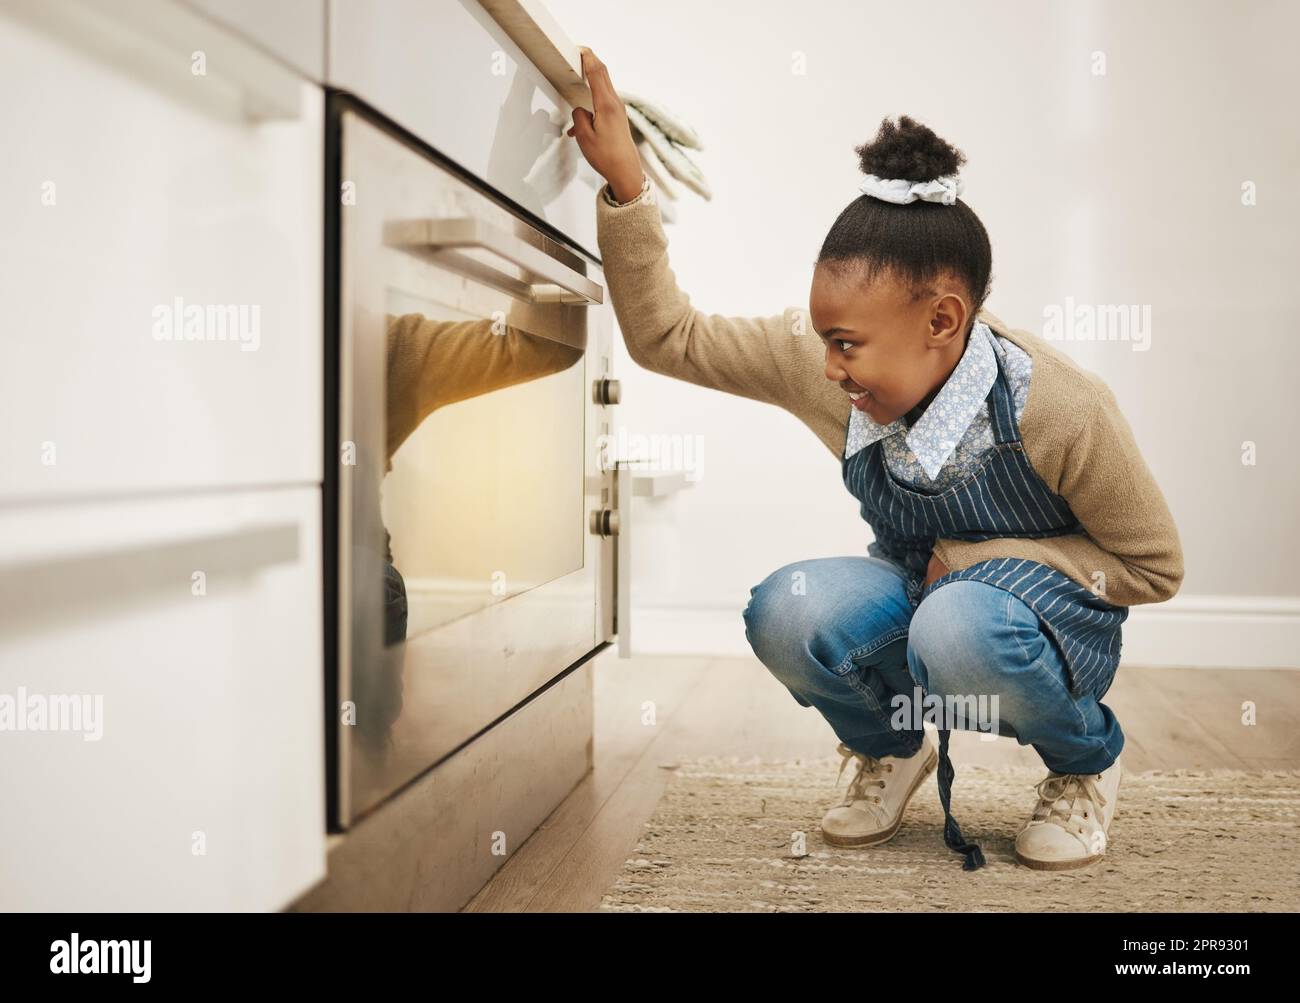 How much longer. a little girl watching her baked goods cook in the oven at home. Stock Photo